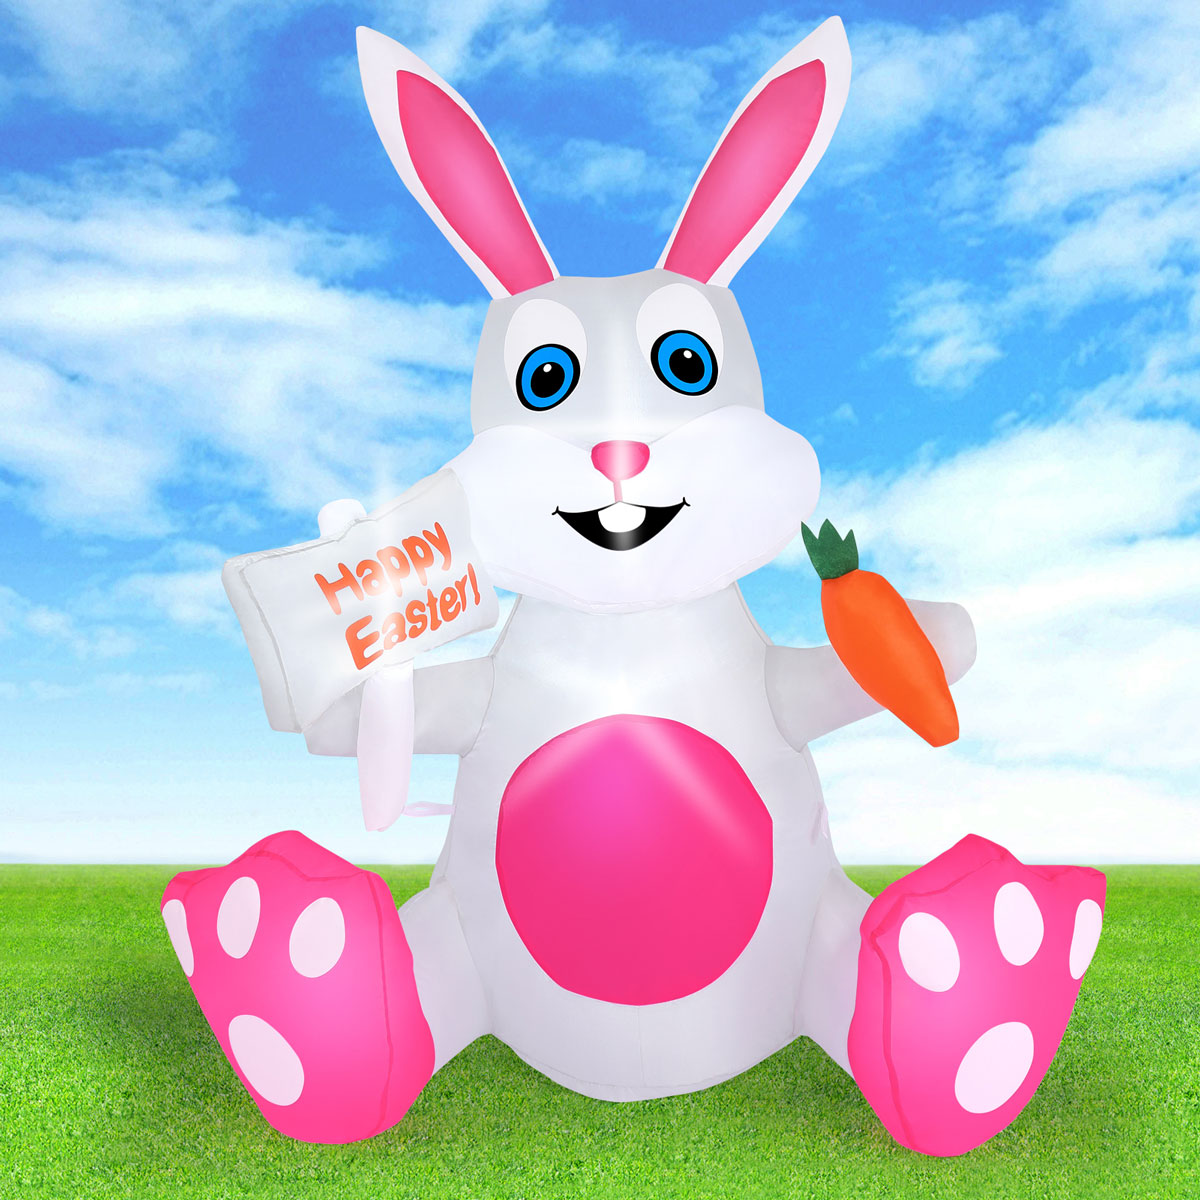 4FT Inflatable Easter Bunny with Built-in LED lights, Easter Bunny Inflatable Outdoor Decorations for Lawn, Yard and Garden Decor